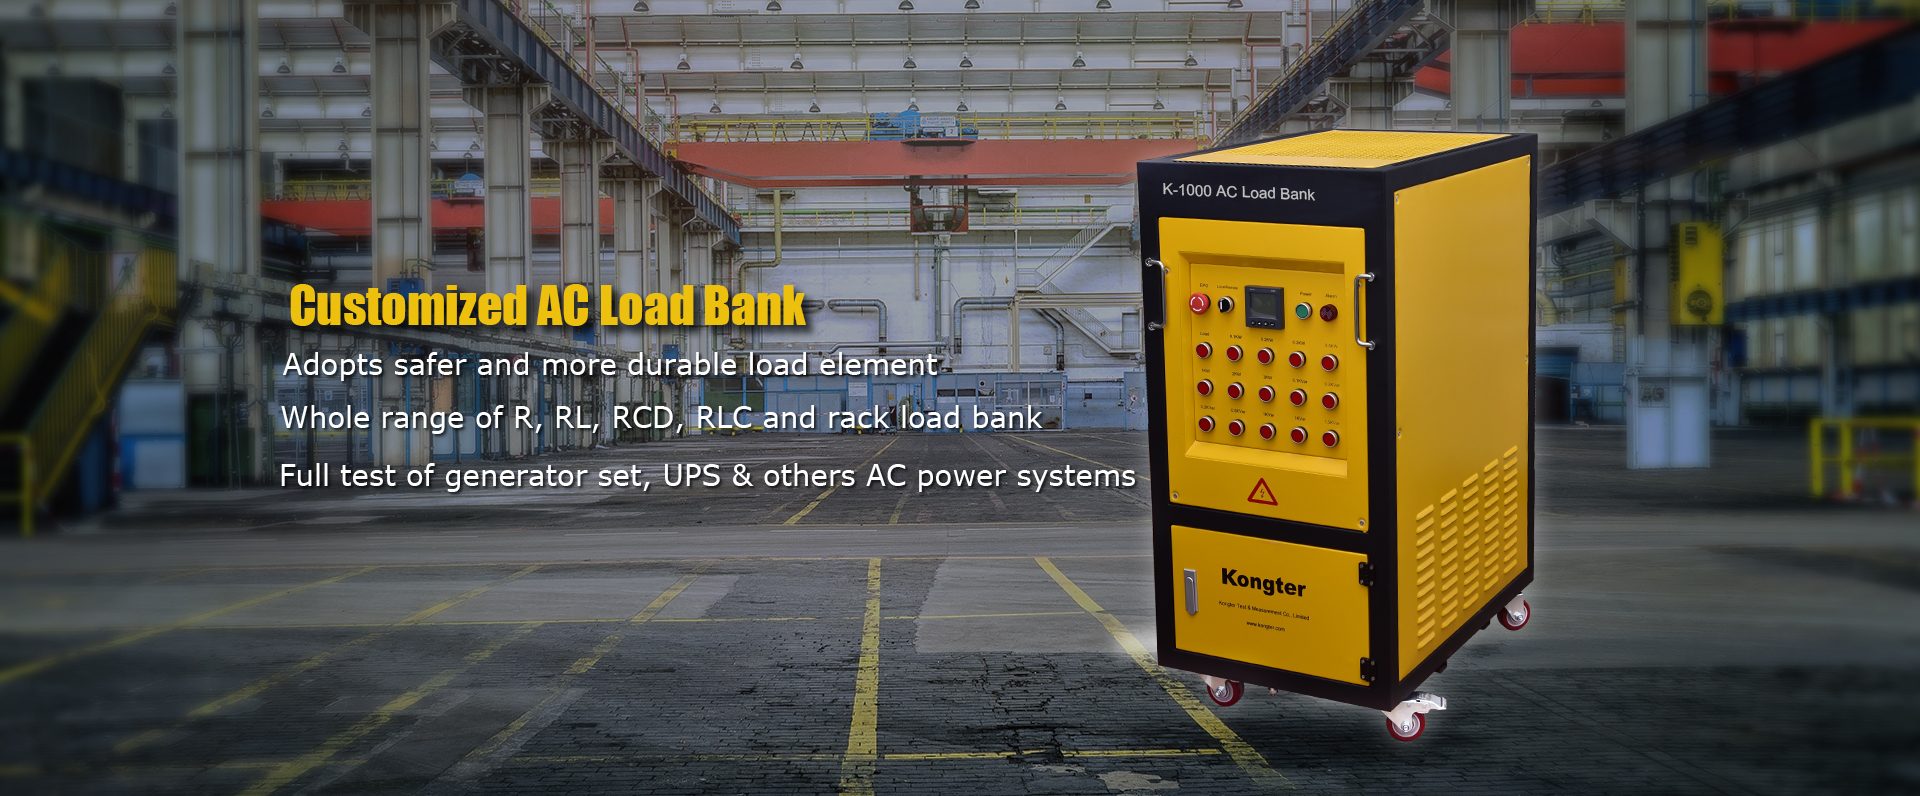 Kongter offers a wide range of customer-tailored AC load banks that excel in a range of load test applications and environments.